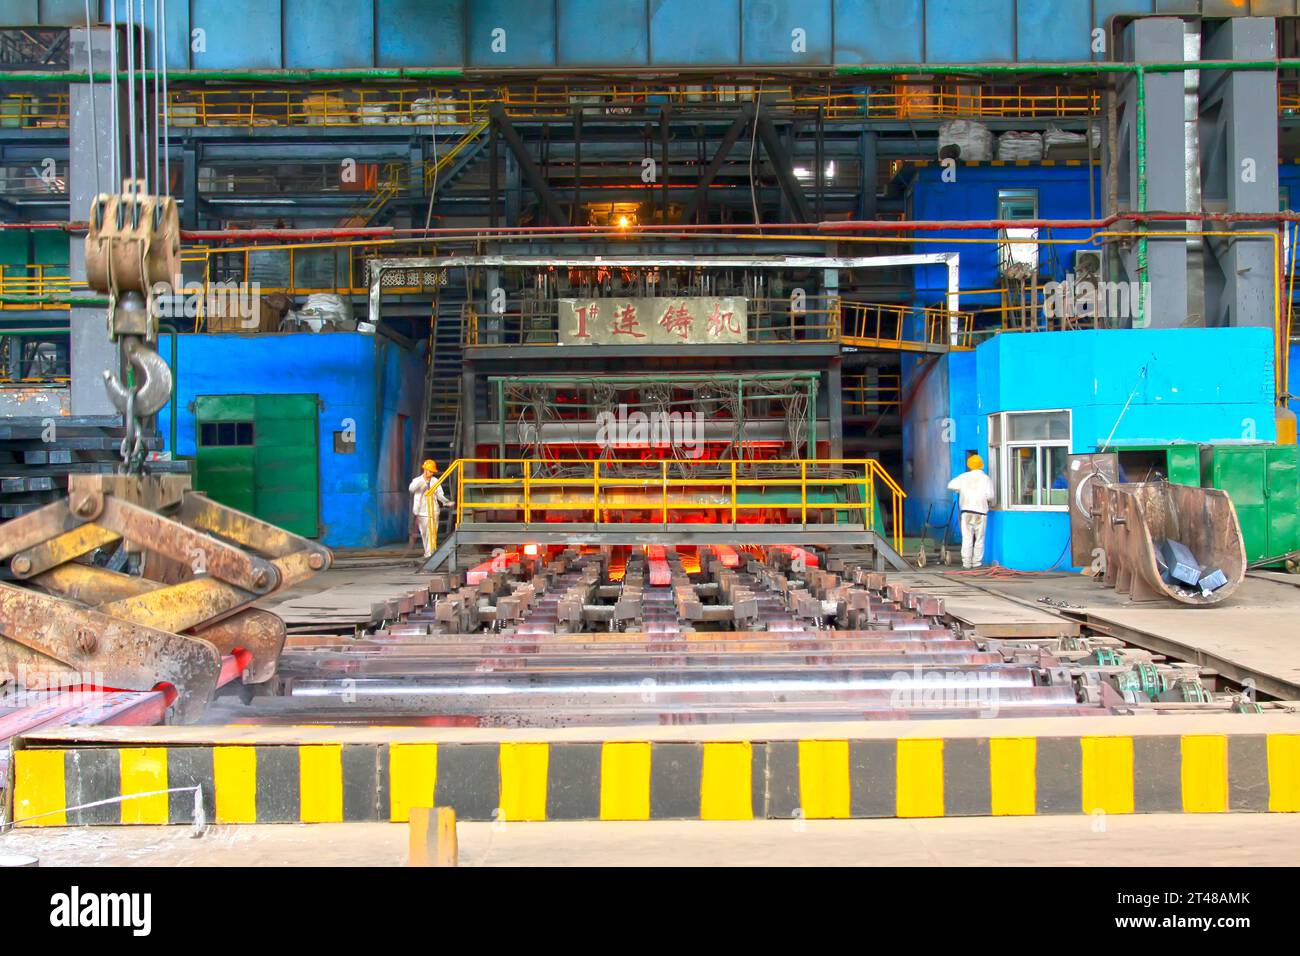 TANGSHAN - JUNE 20: continuous casting machine in a steel plant, on June 20, 2014, Tangshan city, Hebei Province, China Stock Photo